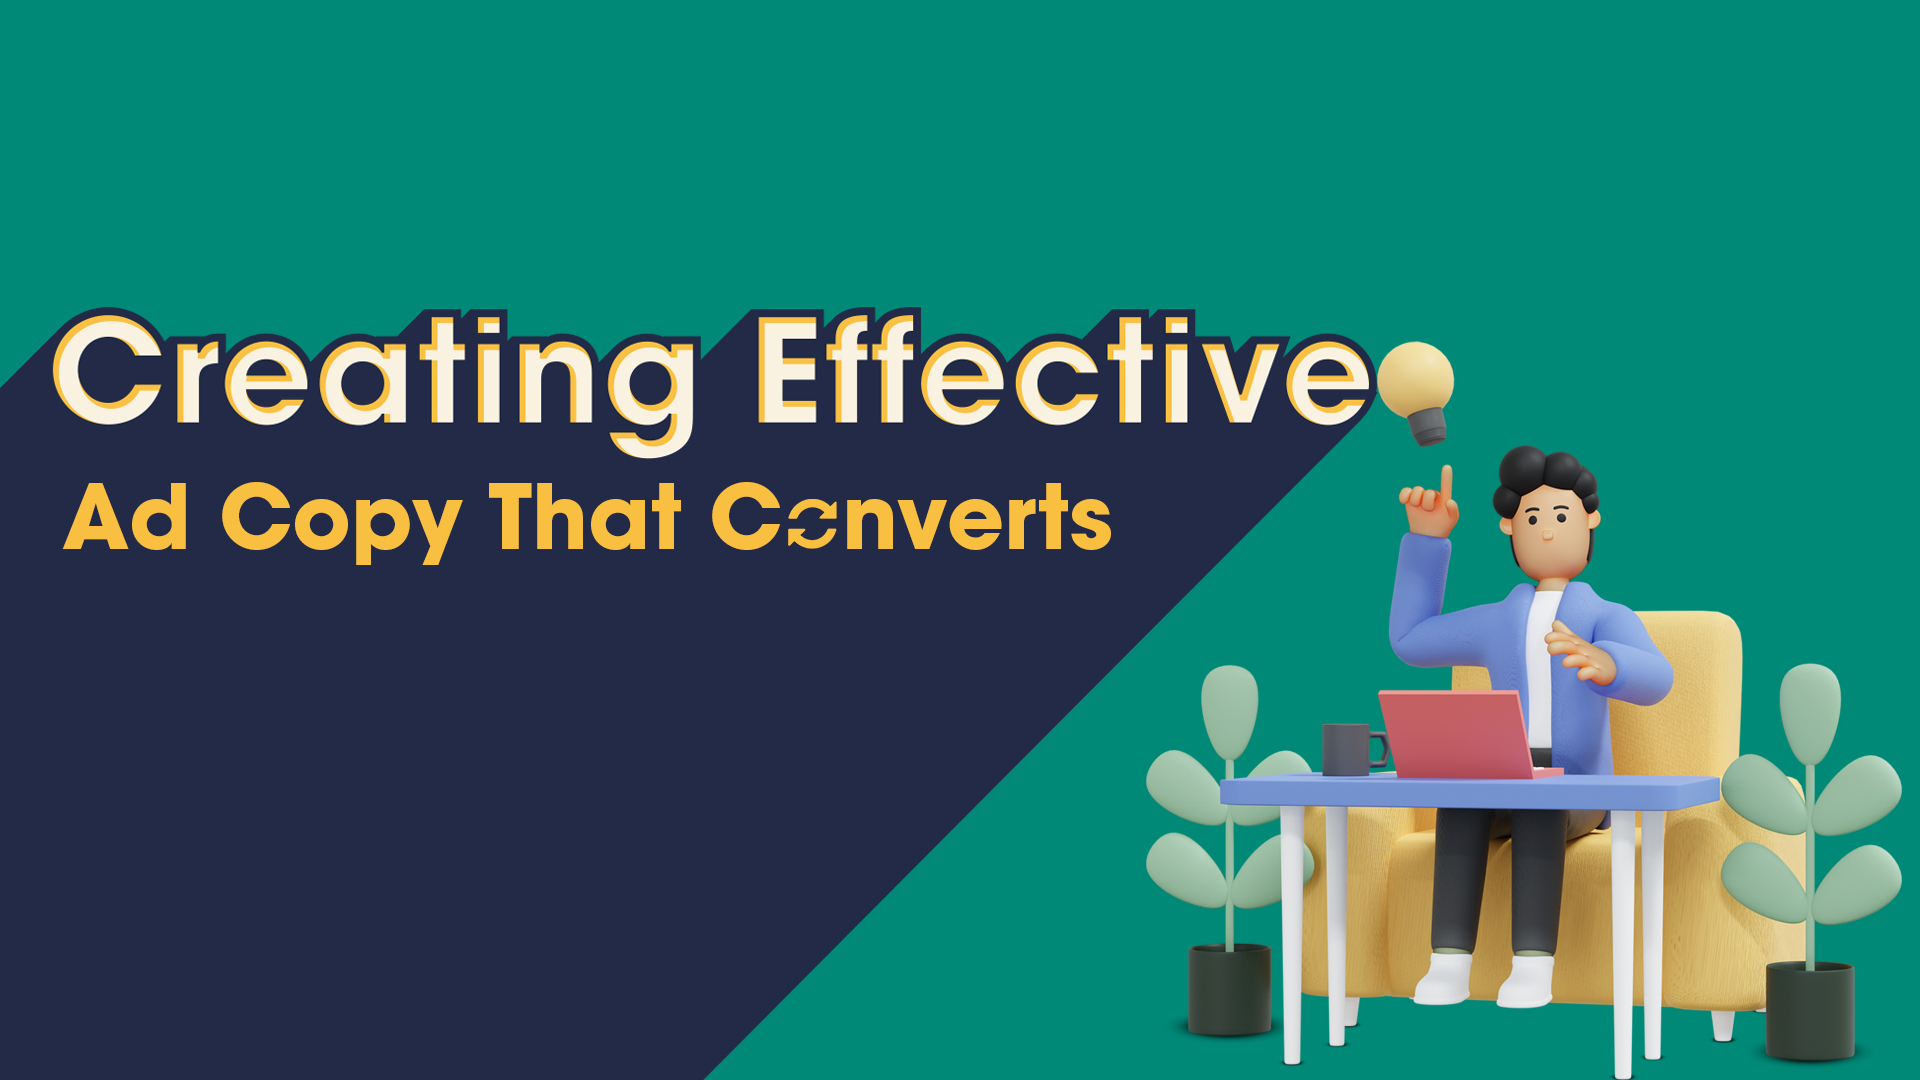 Creating Effective Ad Copy That Converts